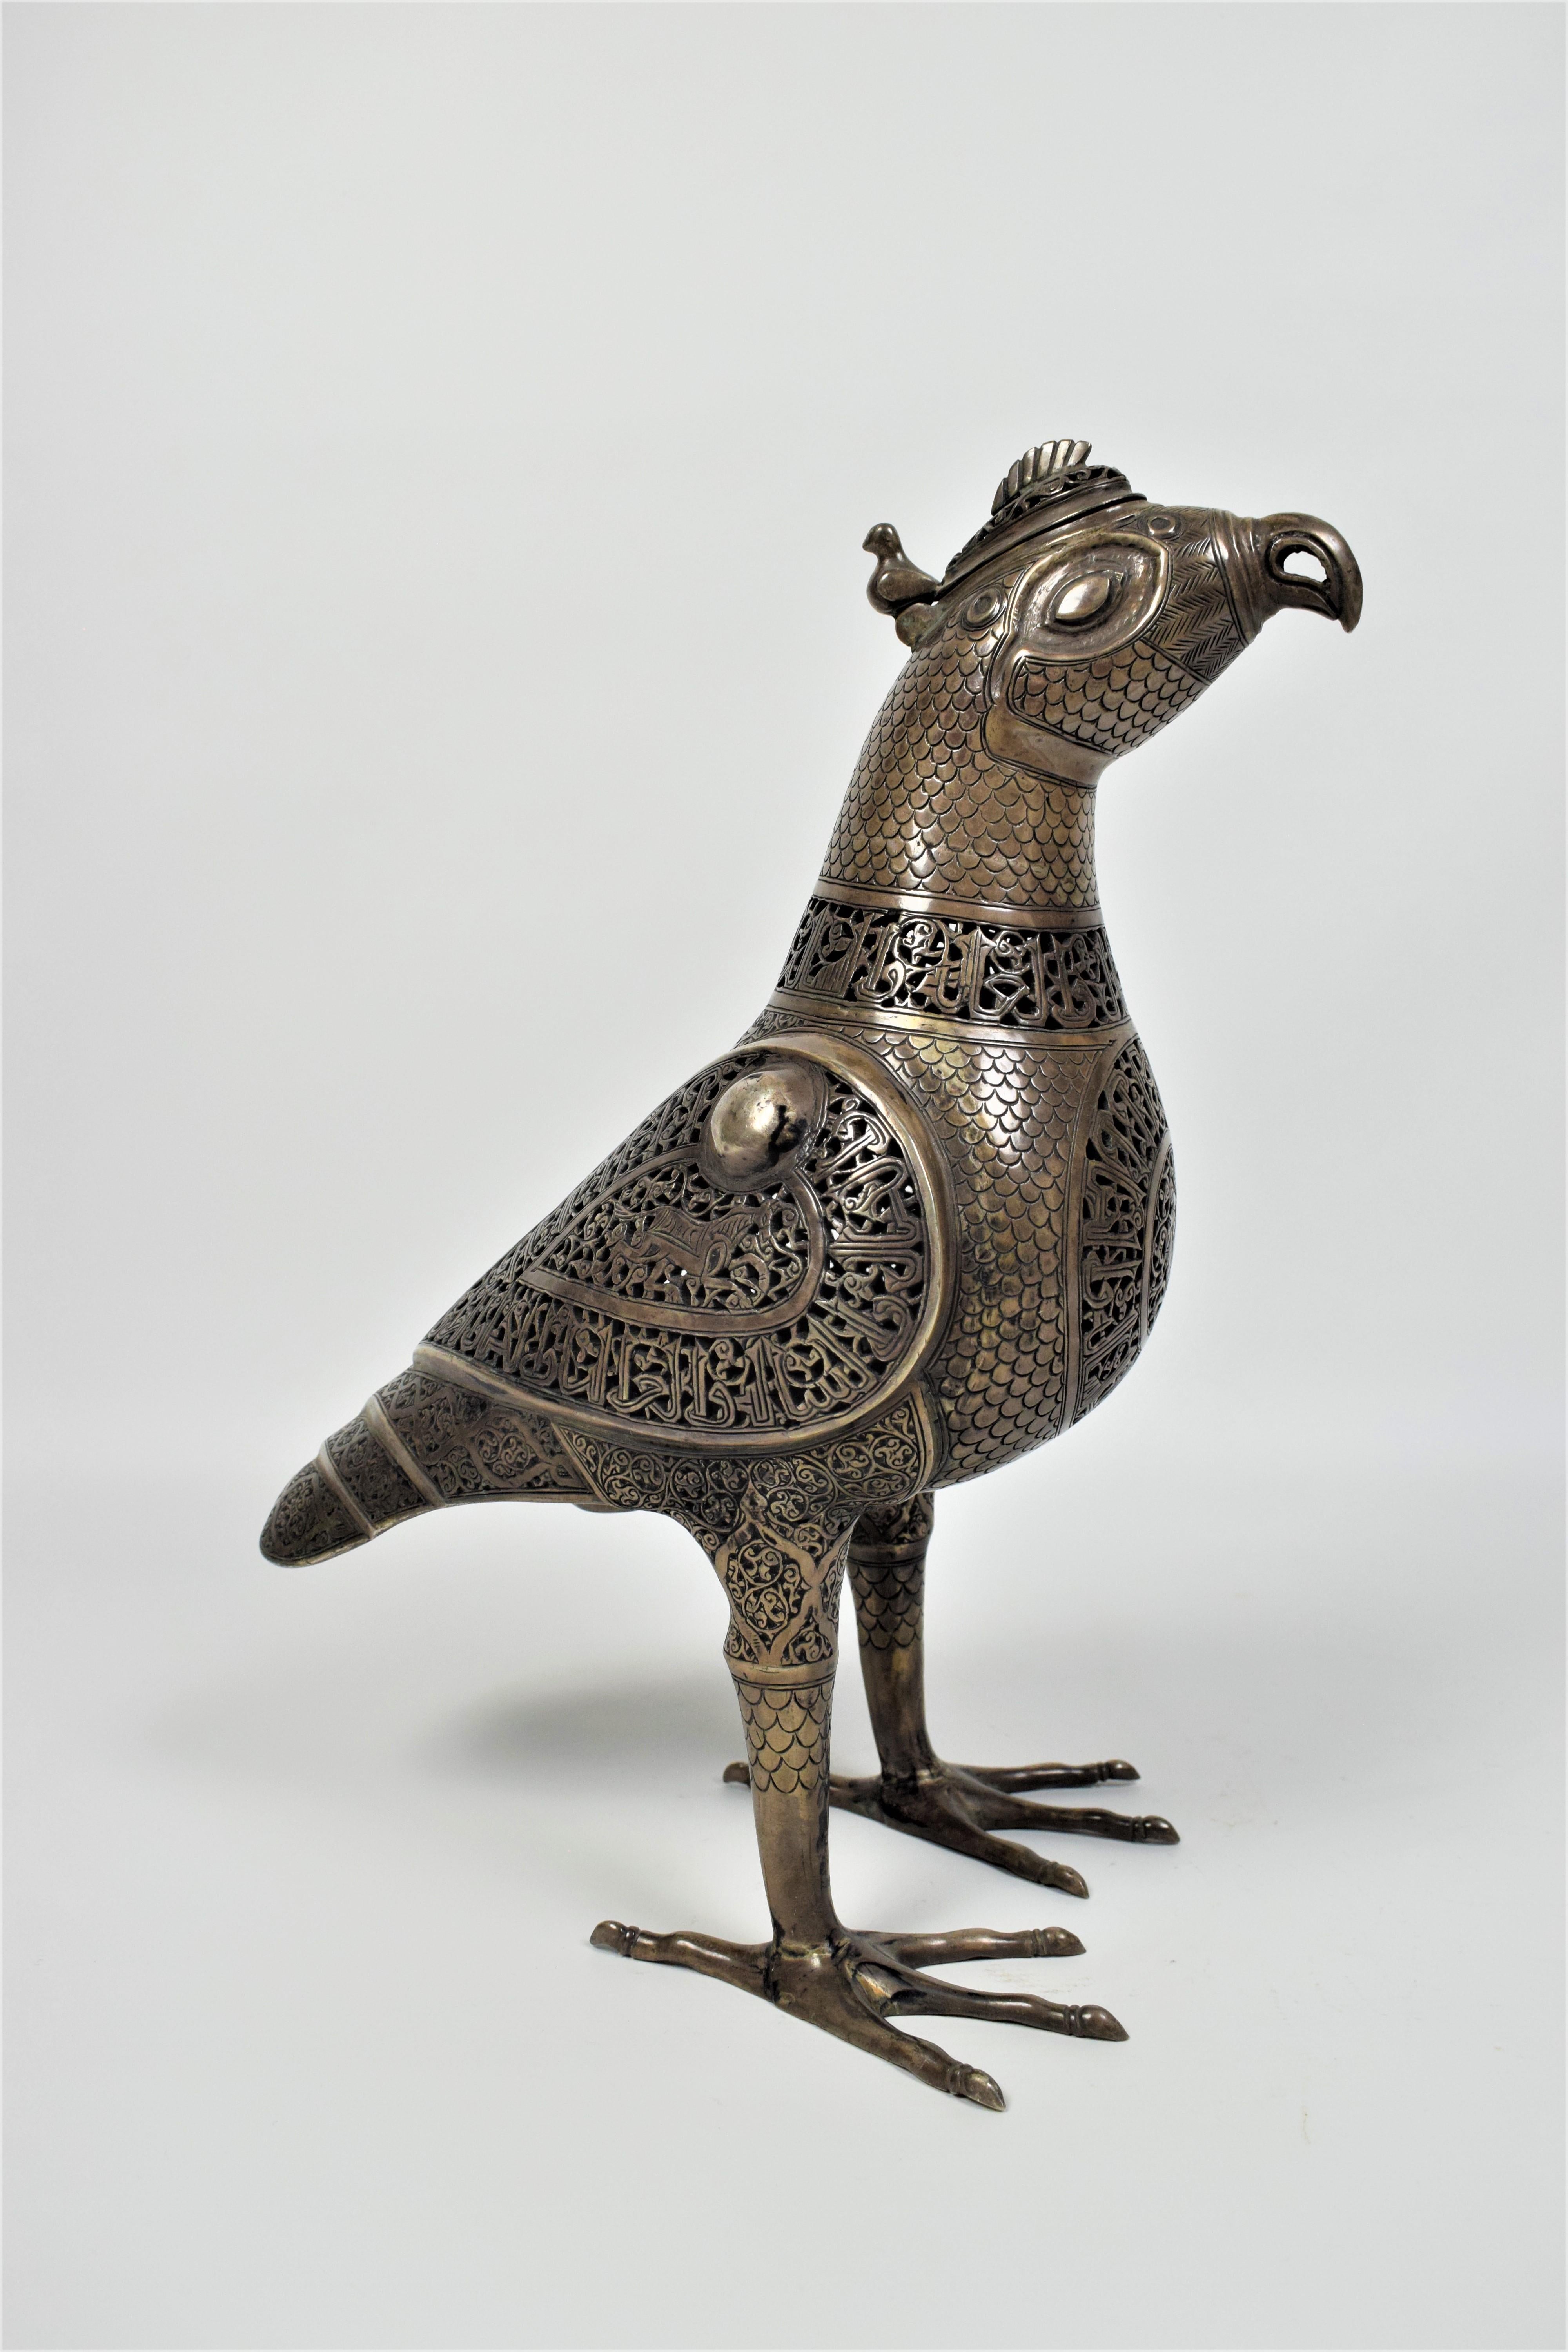 Islamic Silver bird incense Burner, 92% silver, 18th-19th century

An archaistic Islamic incense burner in the shape of a standing bird with extended claws. The bird is prevalent with openwork arabesque ornament designs to the chest, wings, neck